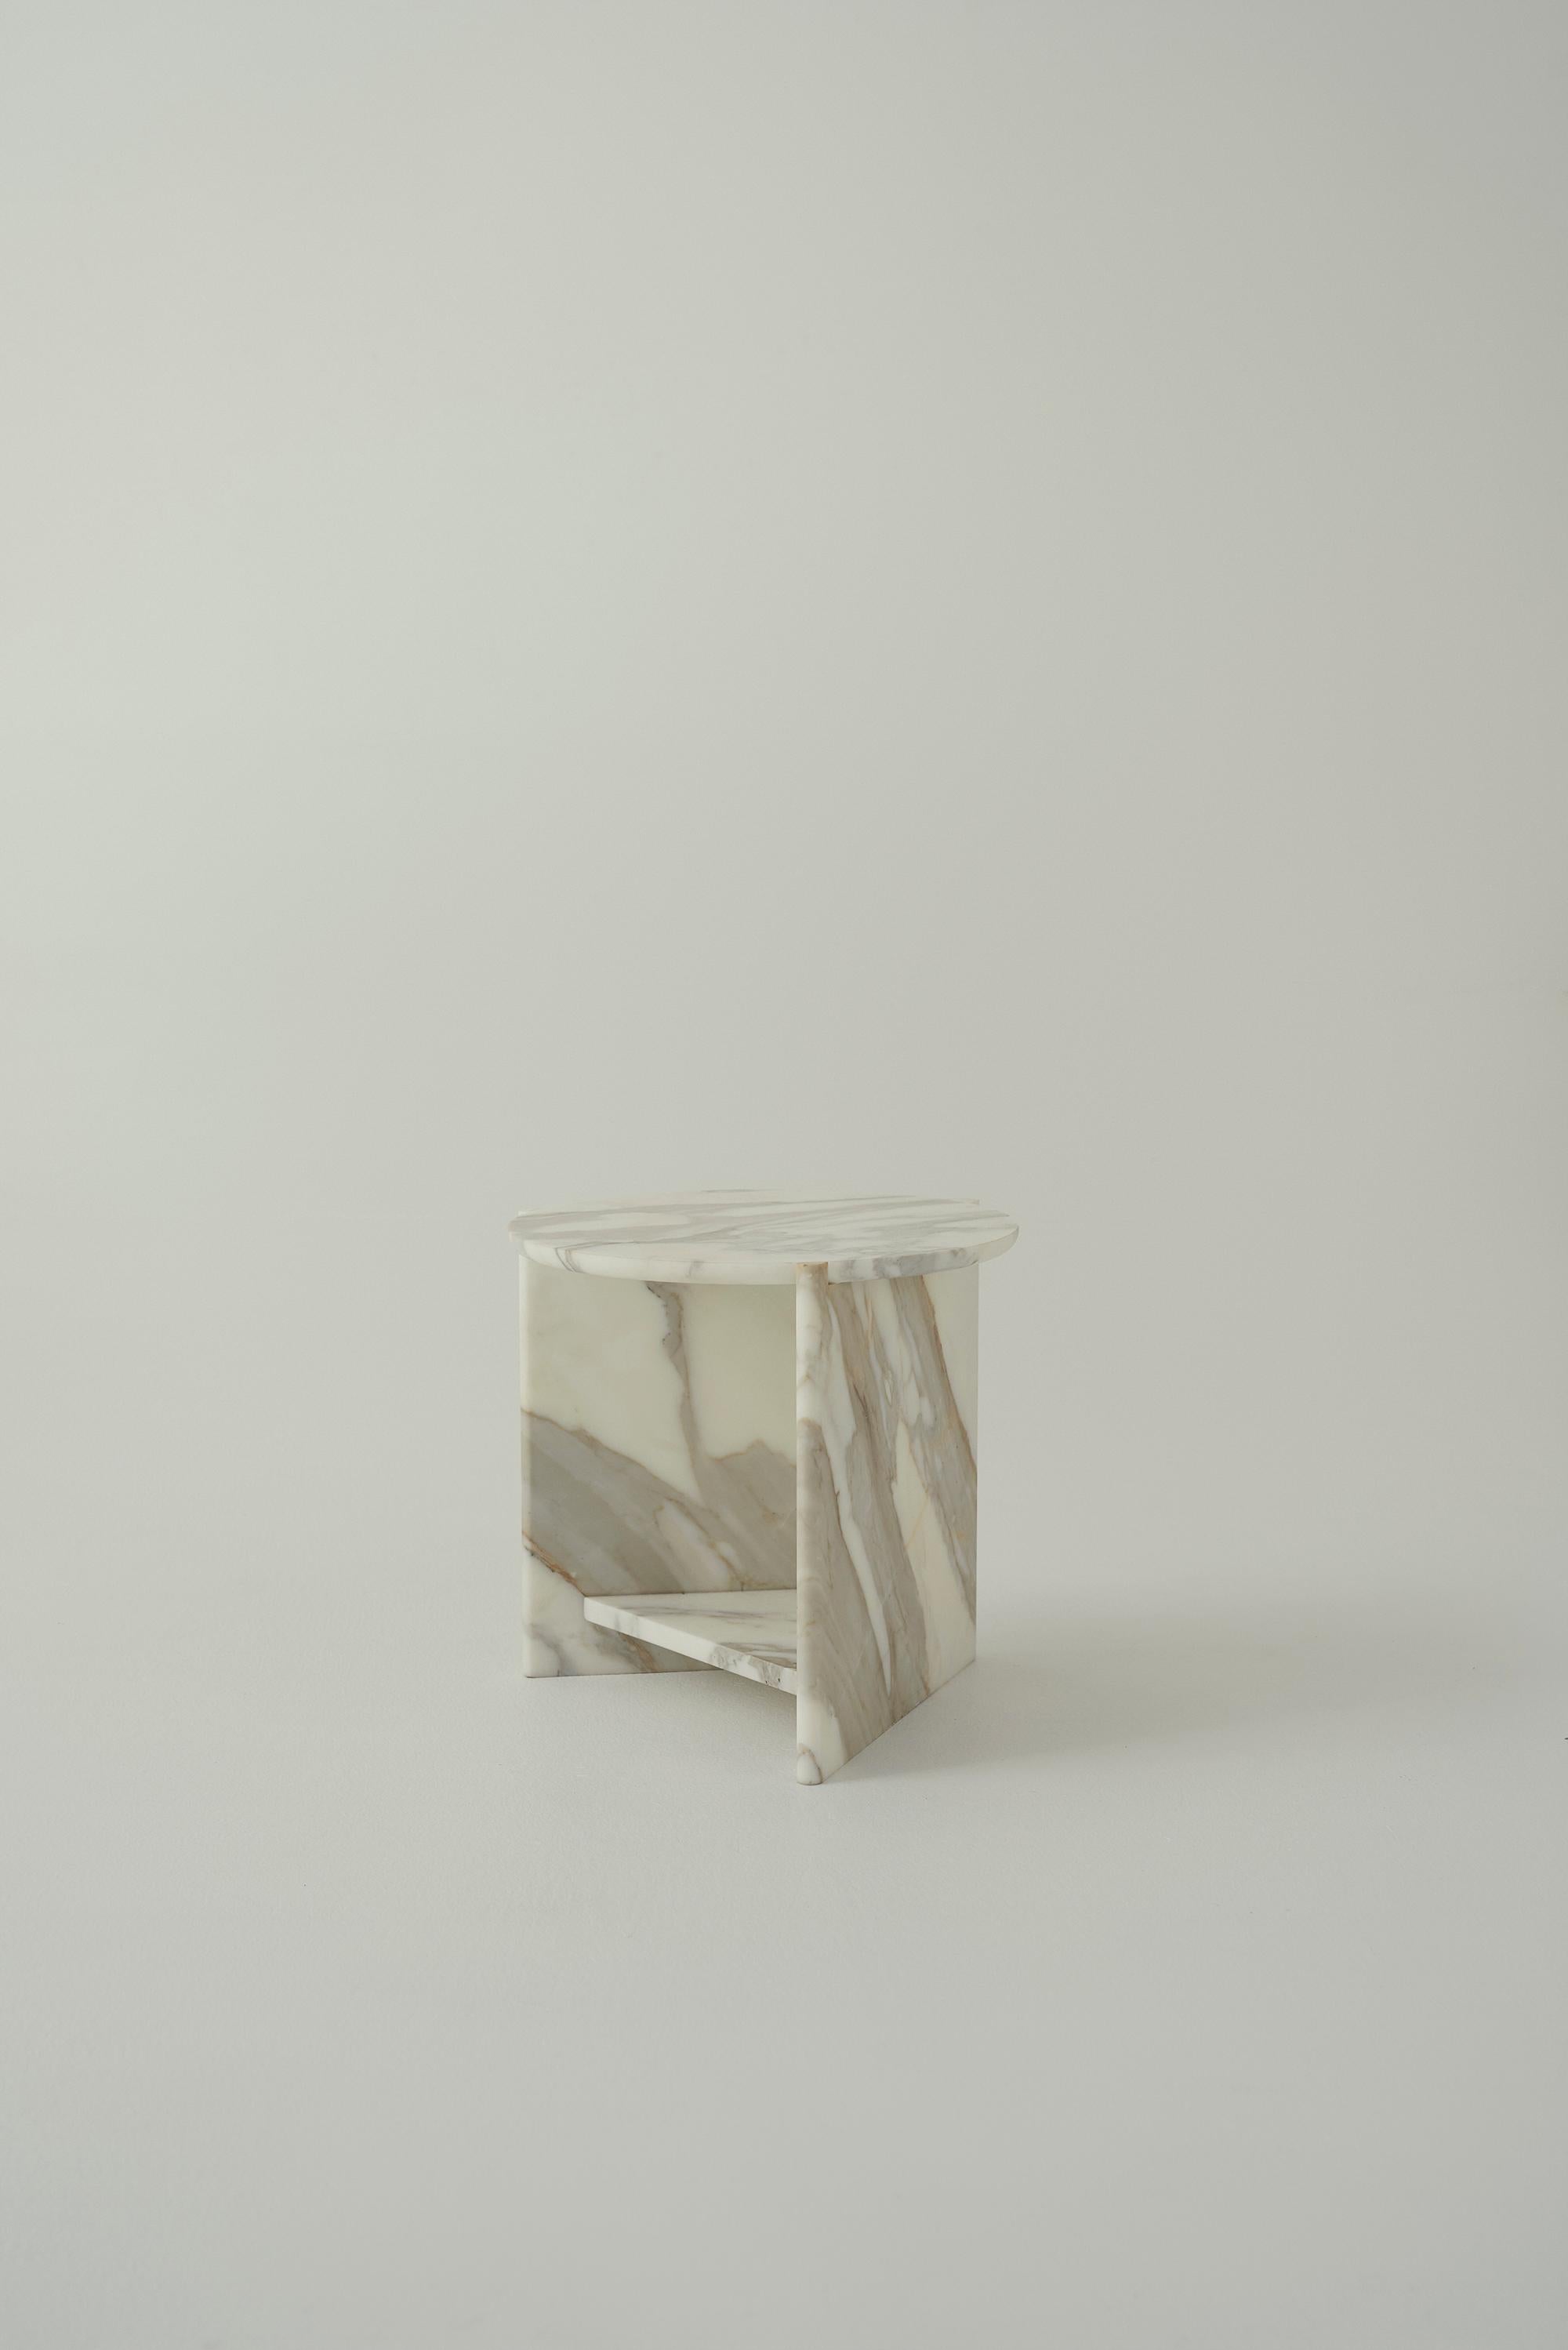 The Portsea side table celebrates elemental forms and quality craftmanship; a
reimagining of the Malibu Side Table in figured natural stone.

Calacatta marble gives tactile dimension to the table’s circular and triangulated forms, with fine stone